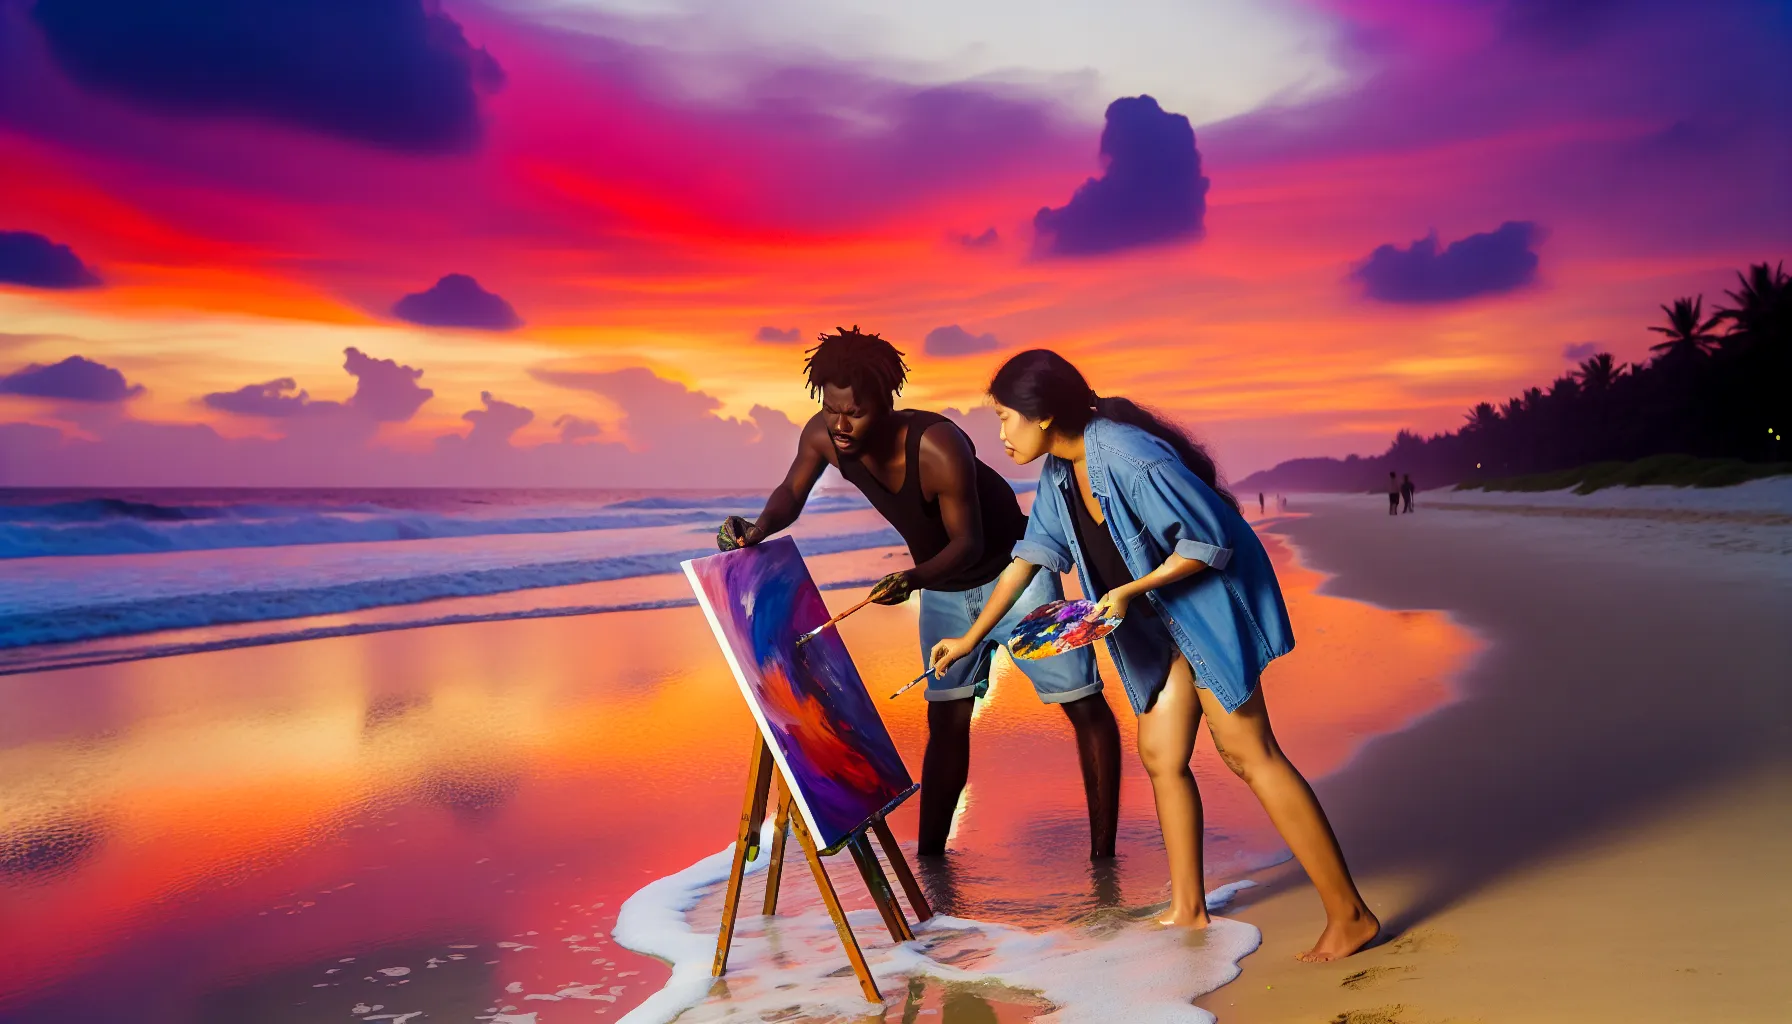 A couple painting a sunset landscape at the beach